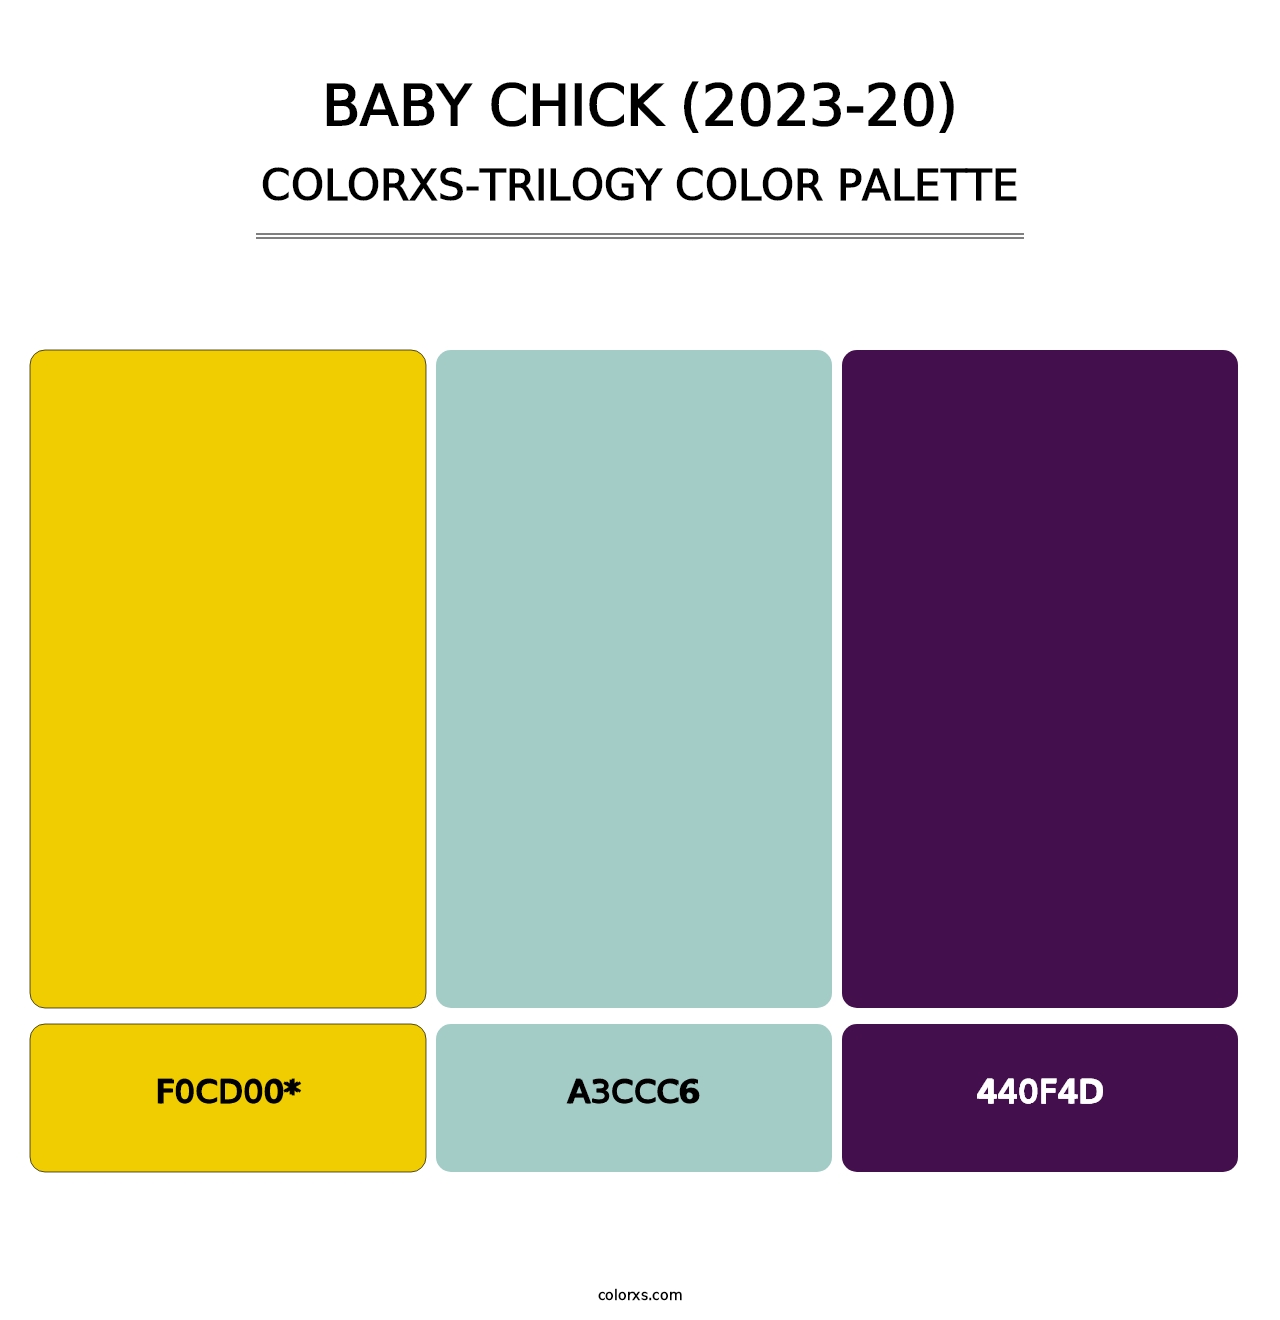 Baby Chick (2023-20) - Colorxs Trilogy Palette